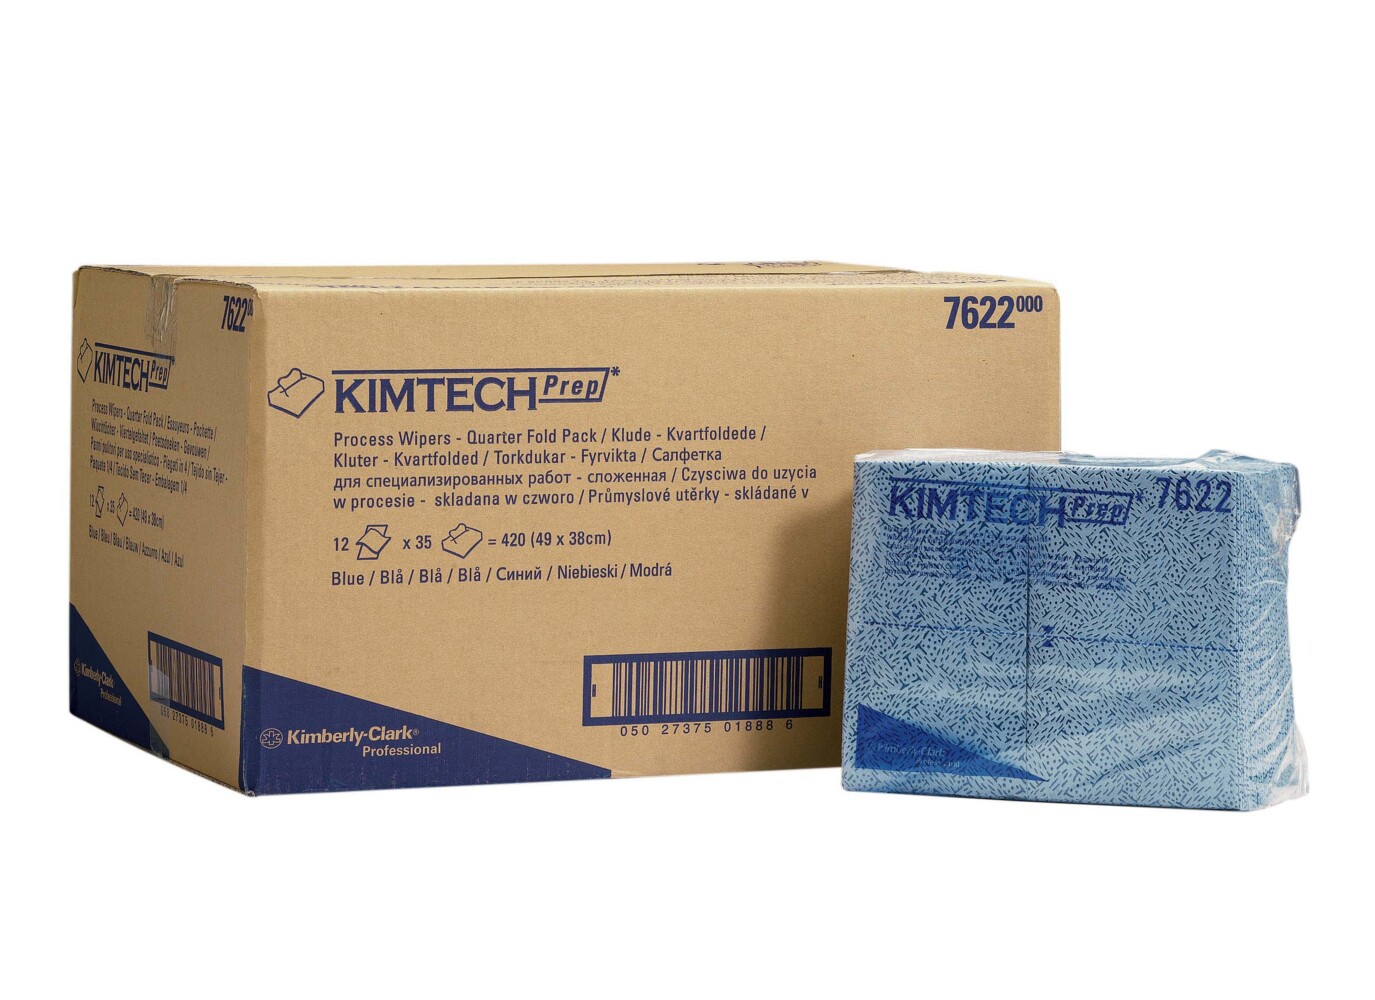 Kimtech® Process Wipers 7622 - 35 quarter-folded, blue sheets per pack (case contains 12 packs) - 7622